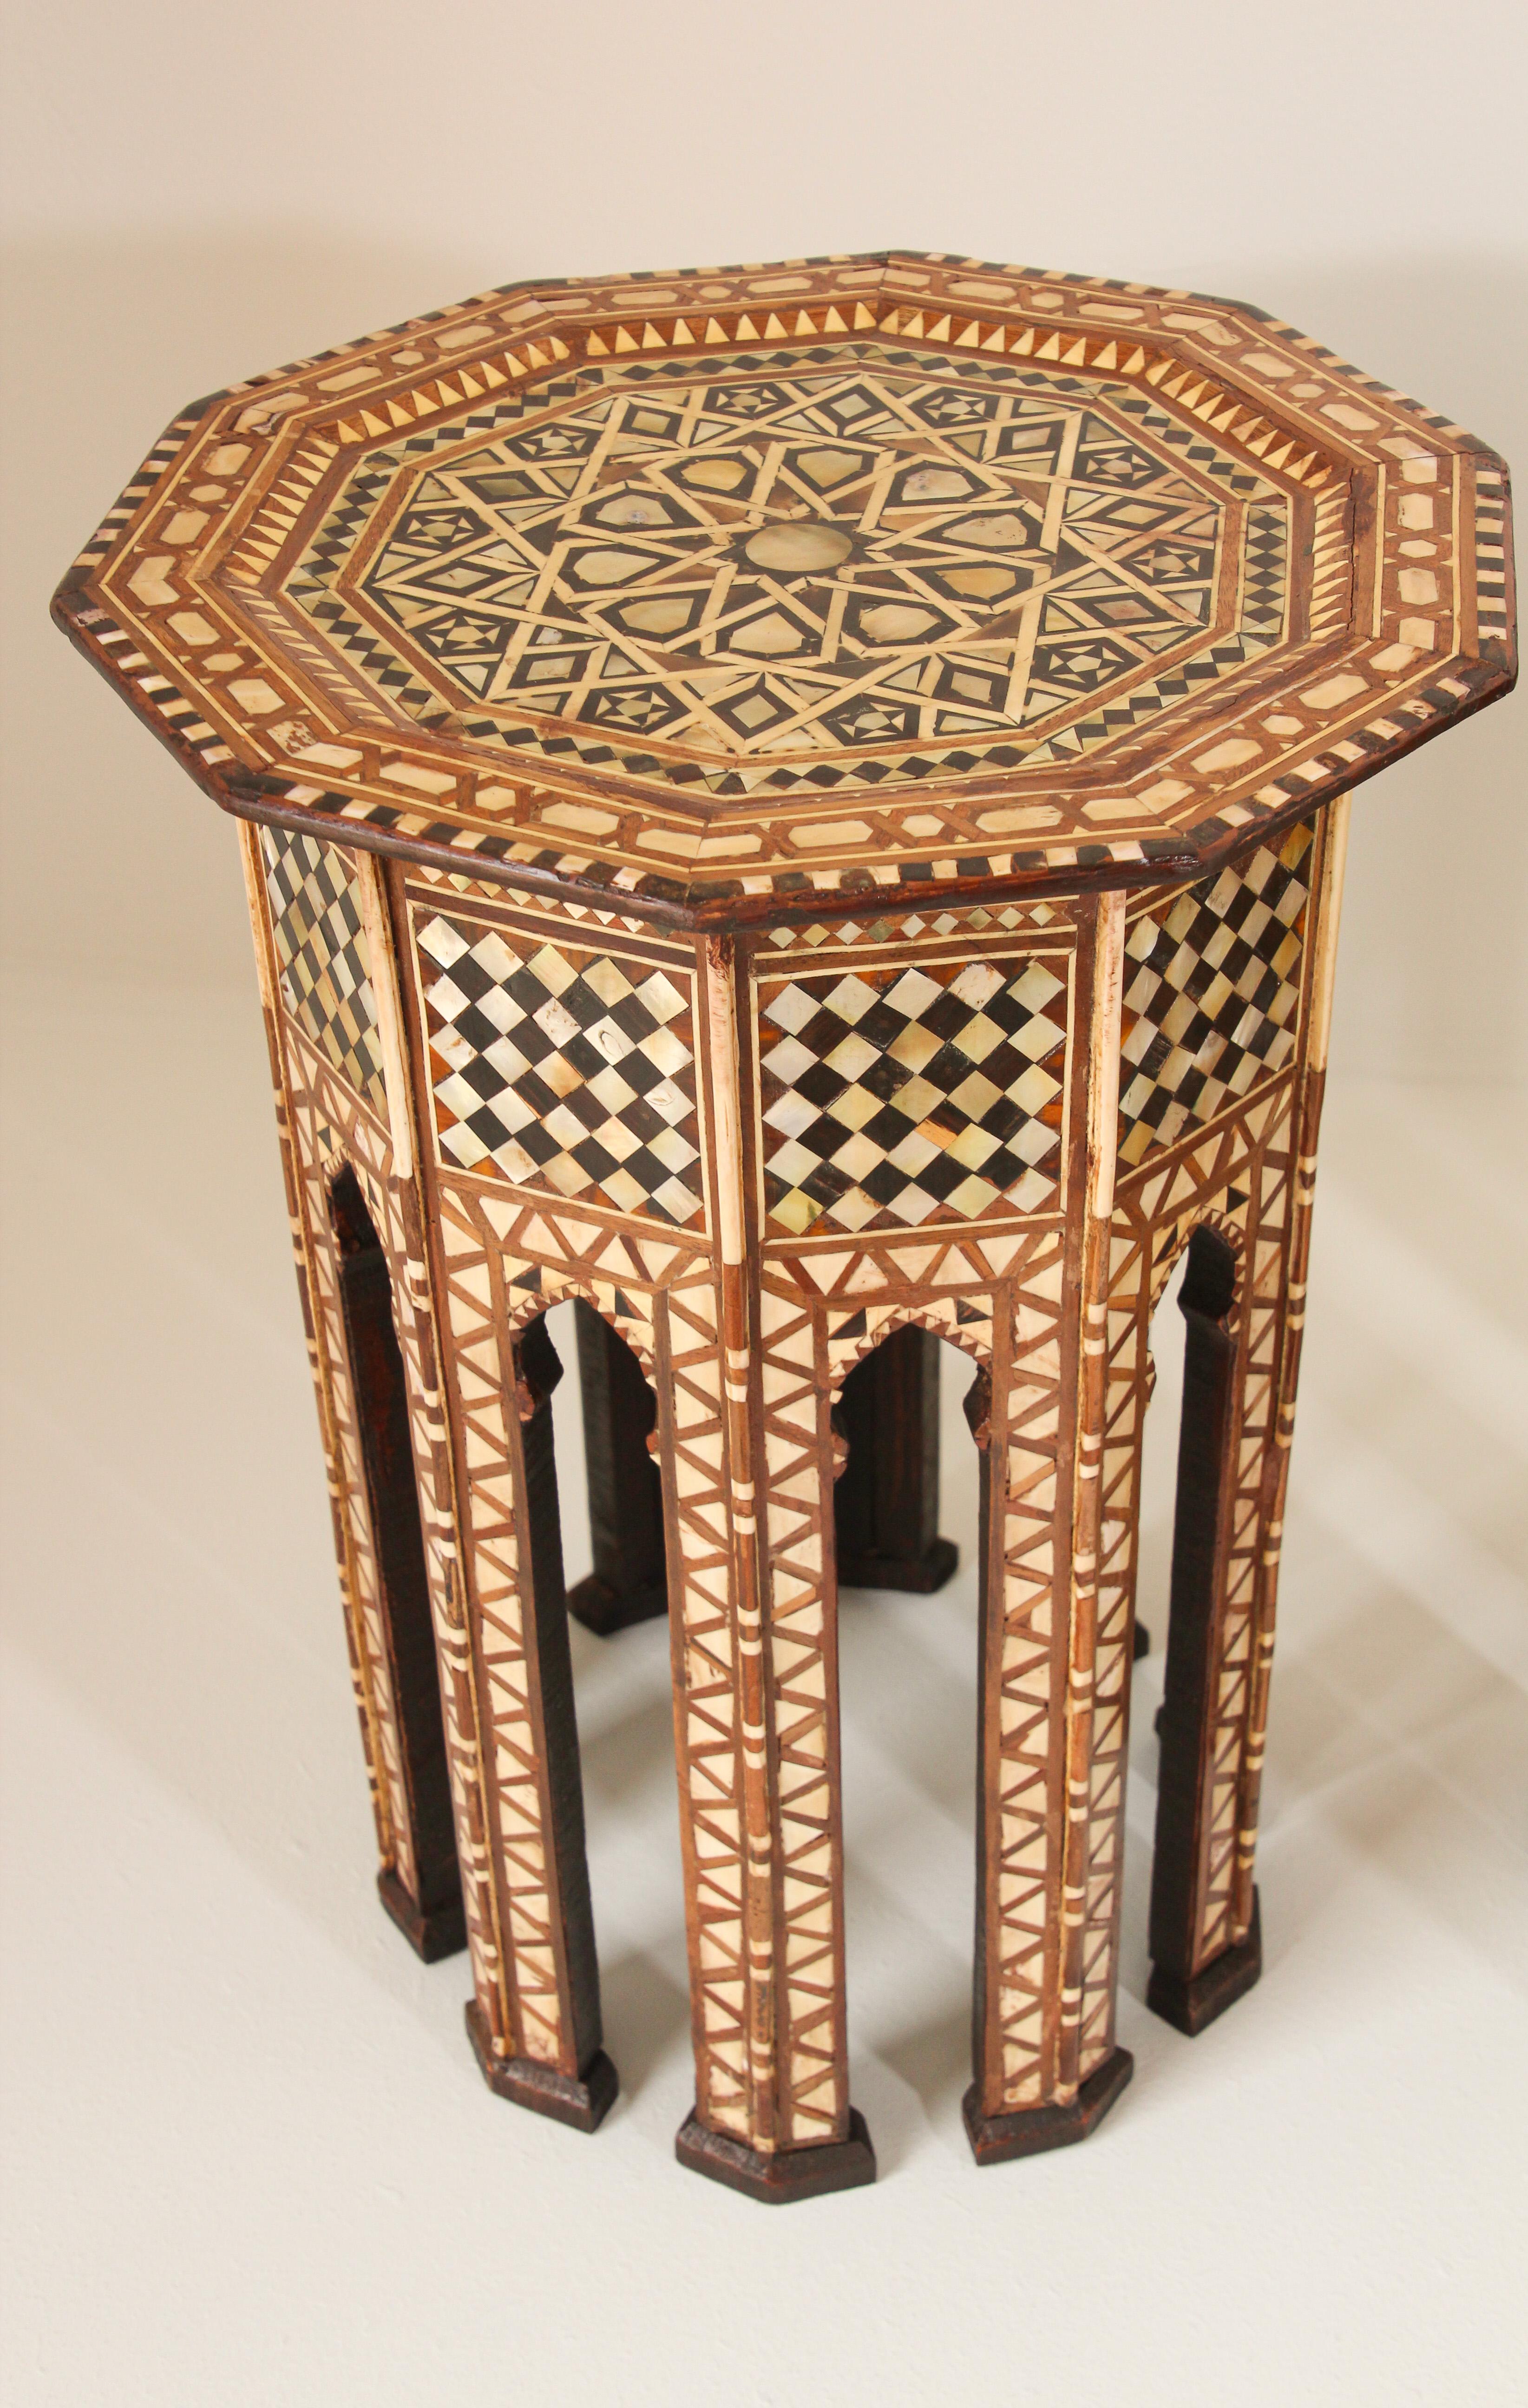 Middle East Syrian Octagonal Tables Inlaid 3